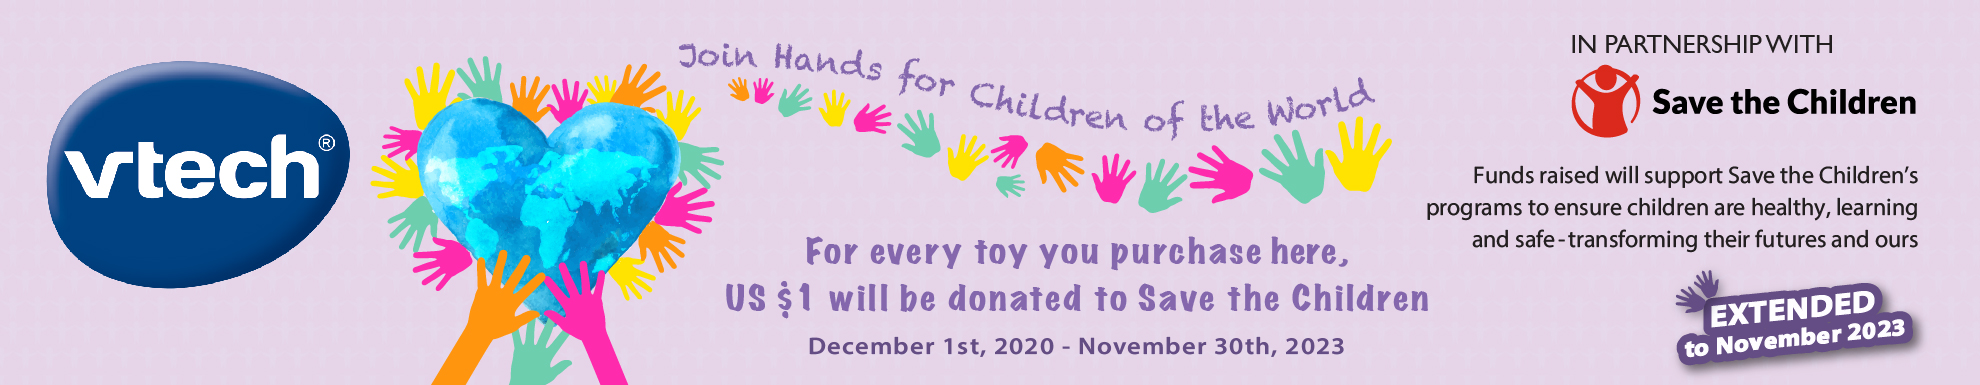 Join Hands for Children of the World - For every toy you purchase here, $1 USD will be donated to Save the Children